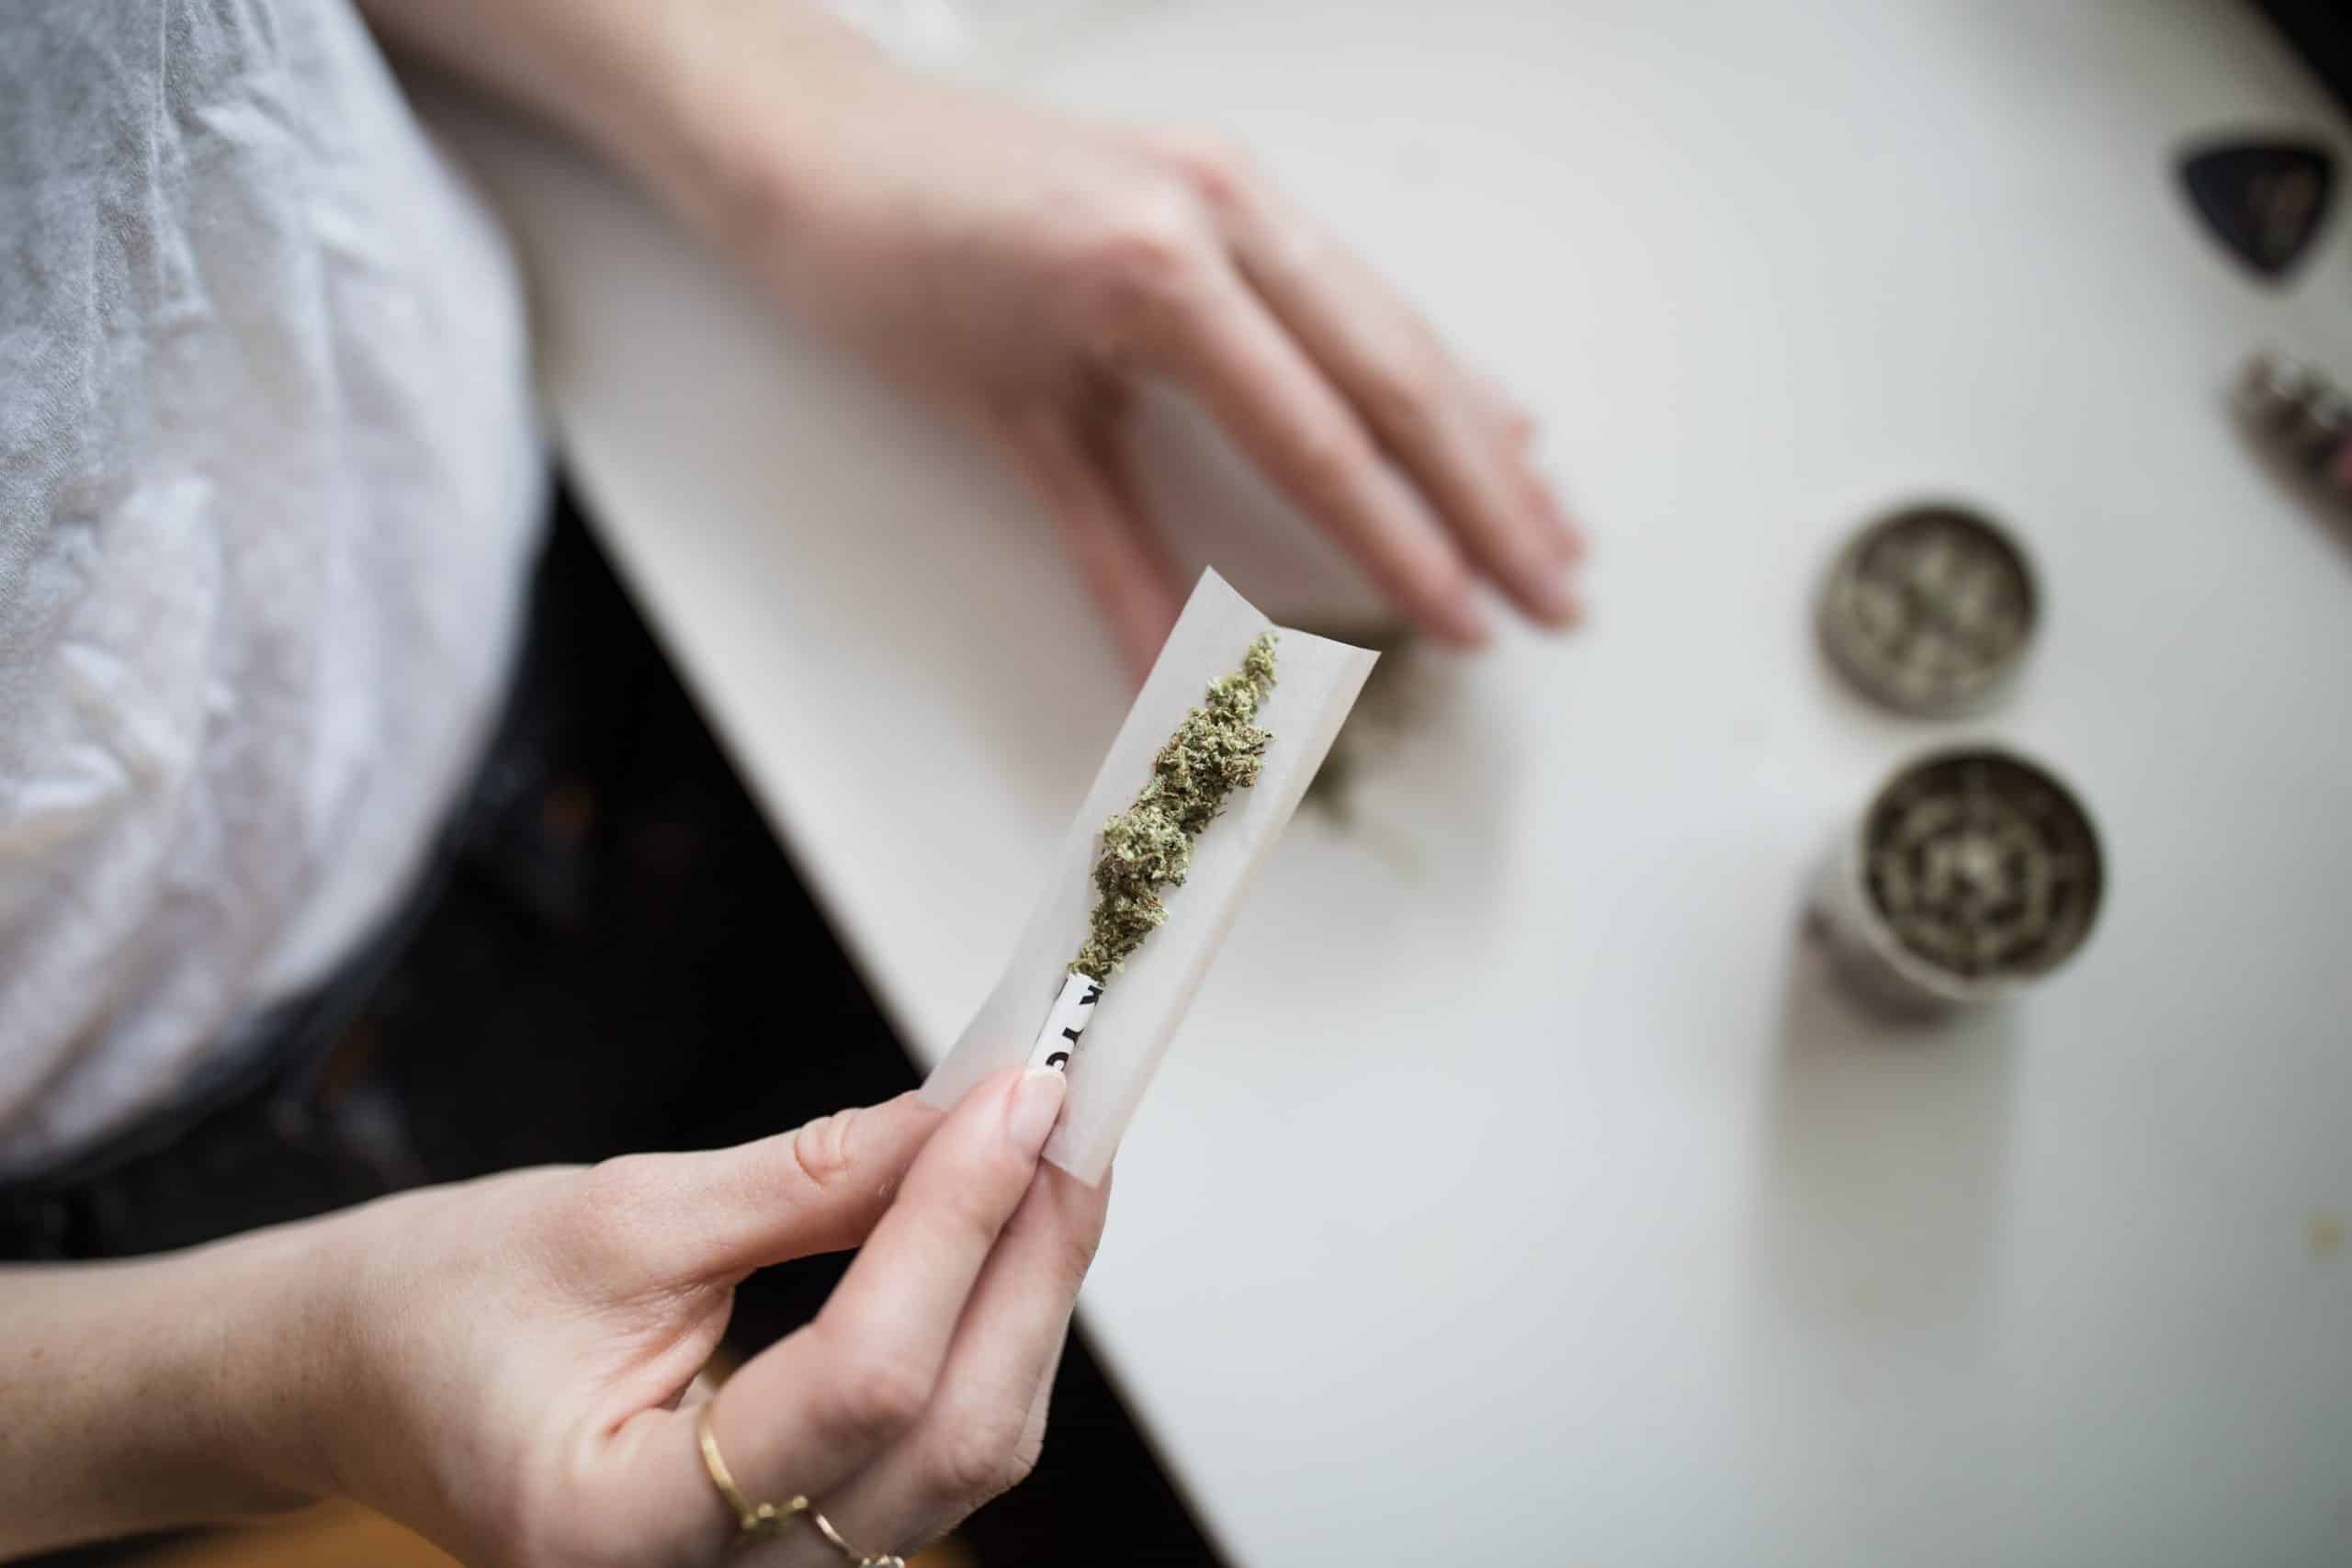 A person rolling a joint, representing drug use at work